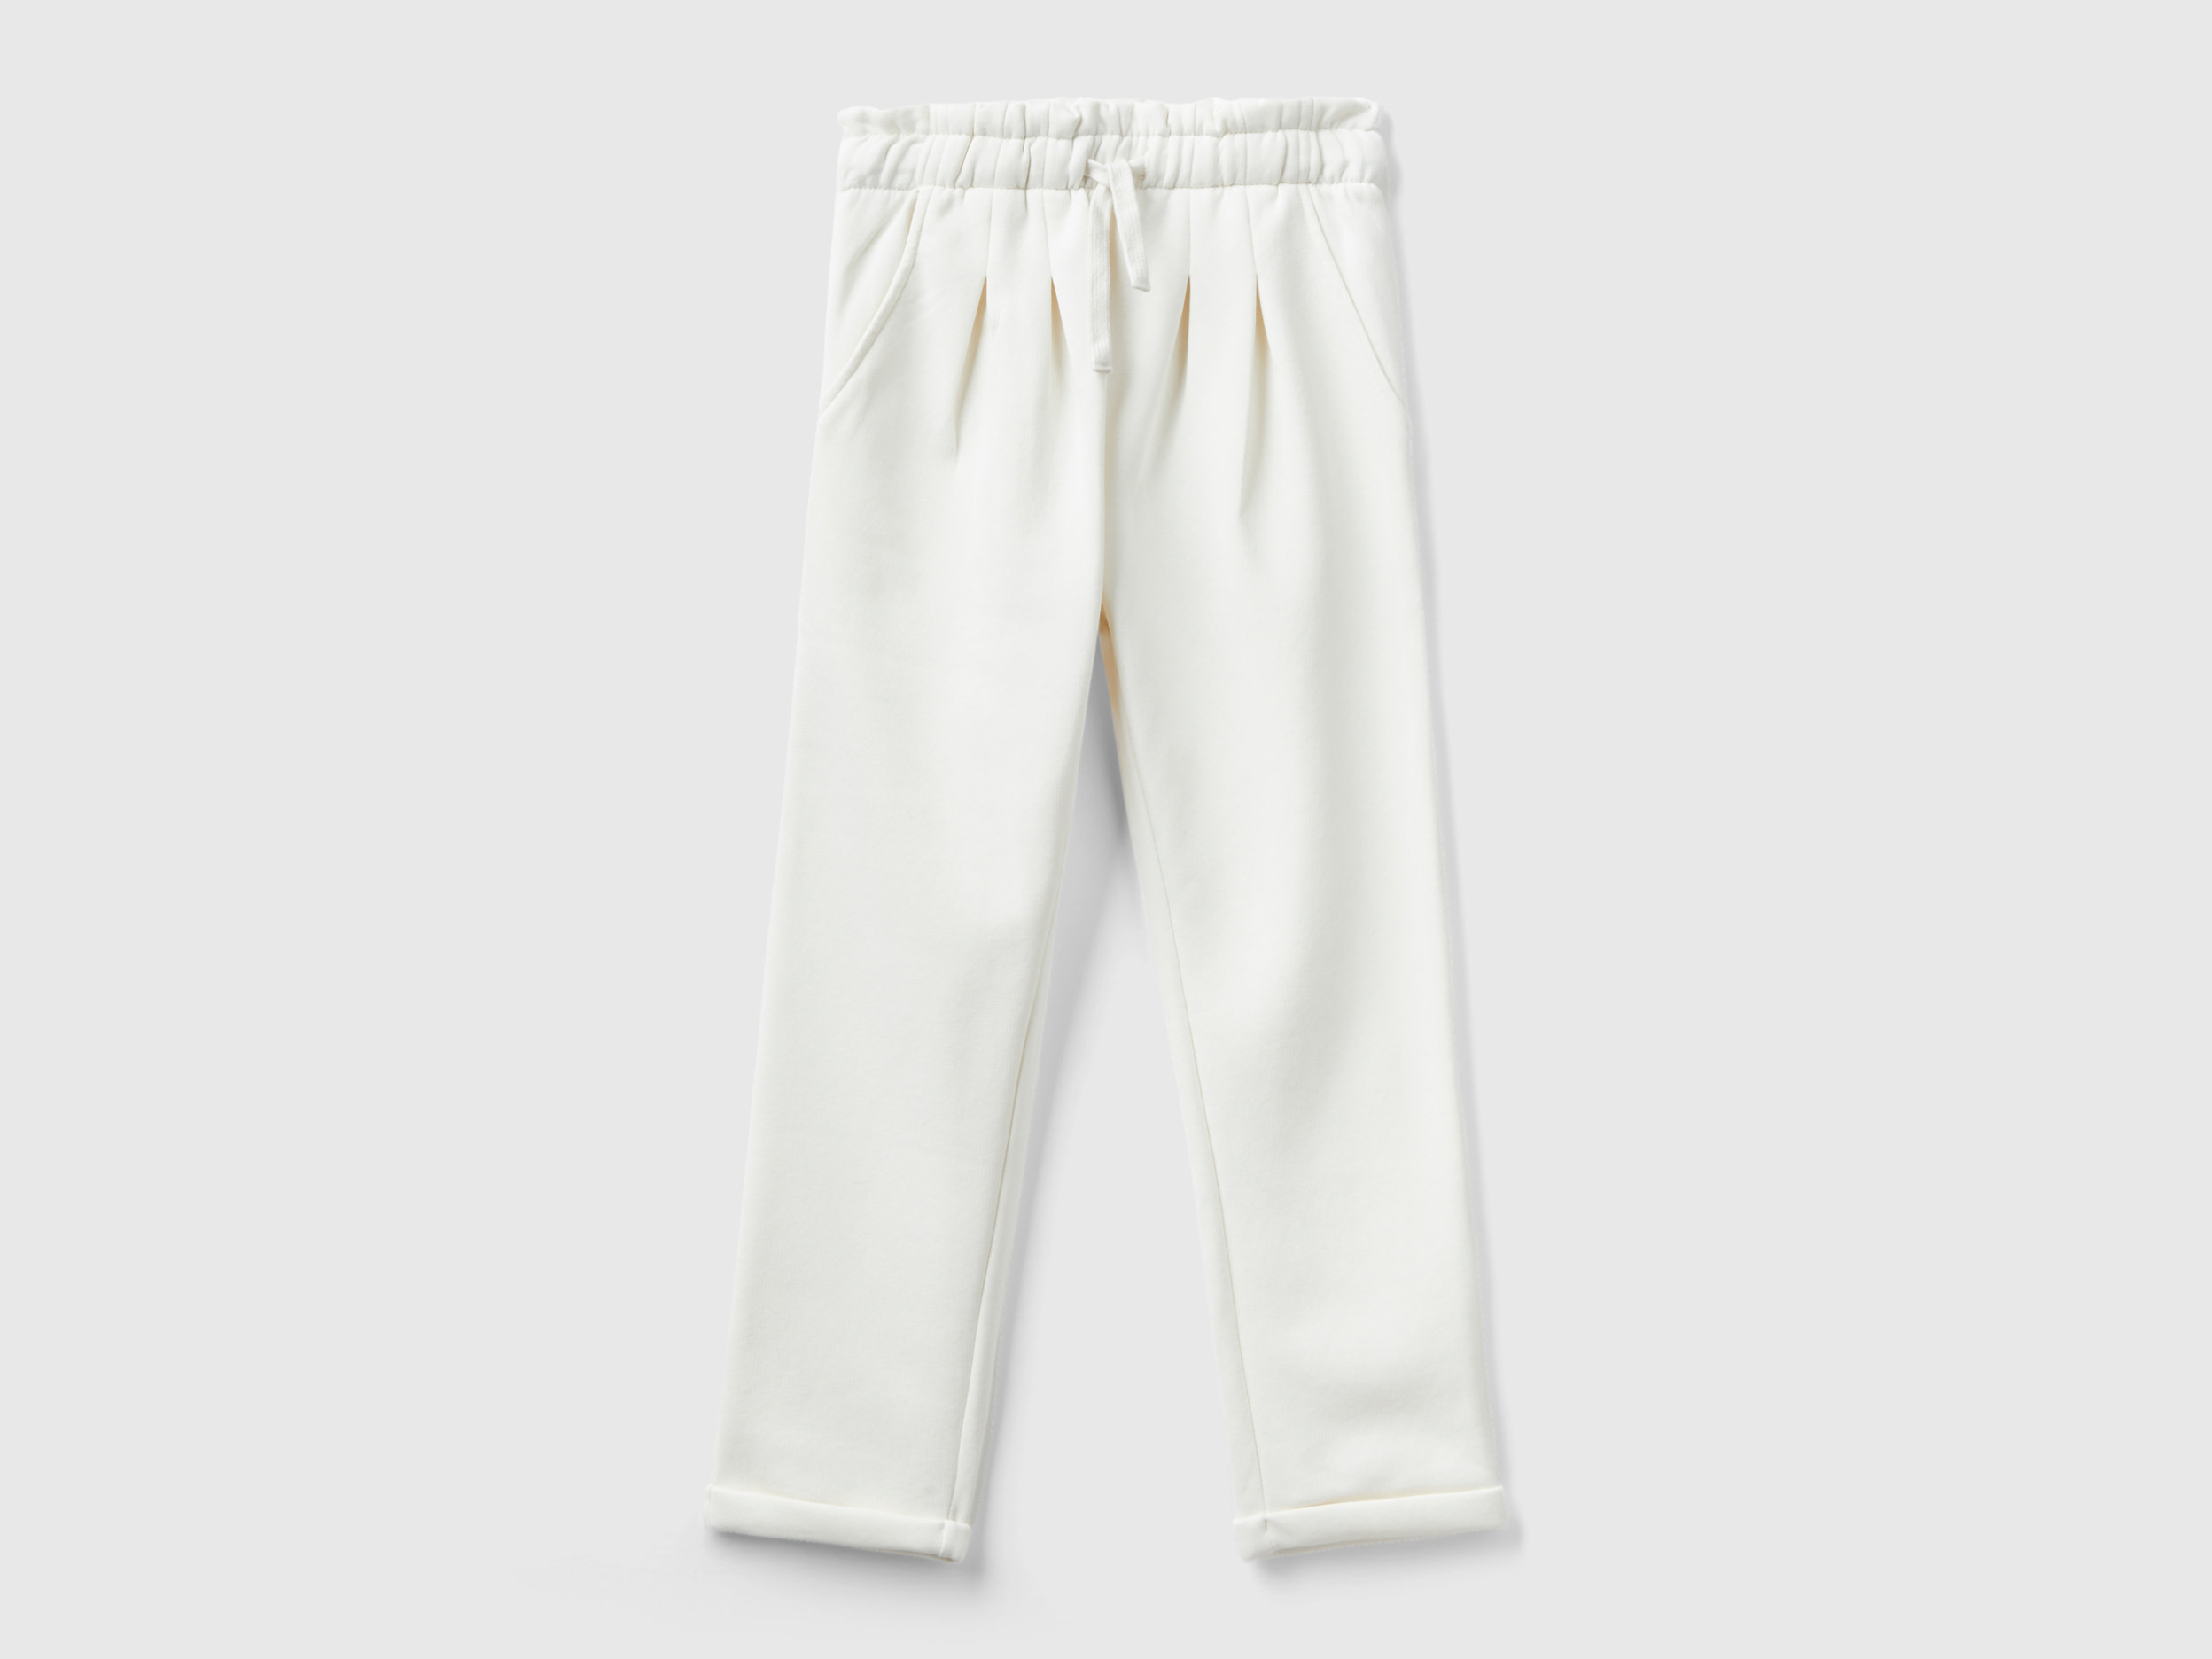 Benetton, Paperbag Trousers In Warm Sweat Fabric, size L, Creamy White, Kids